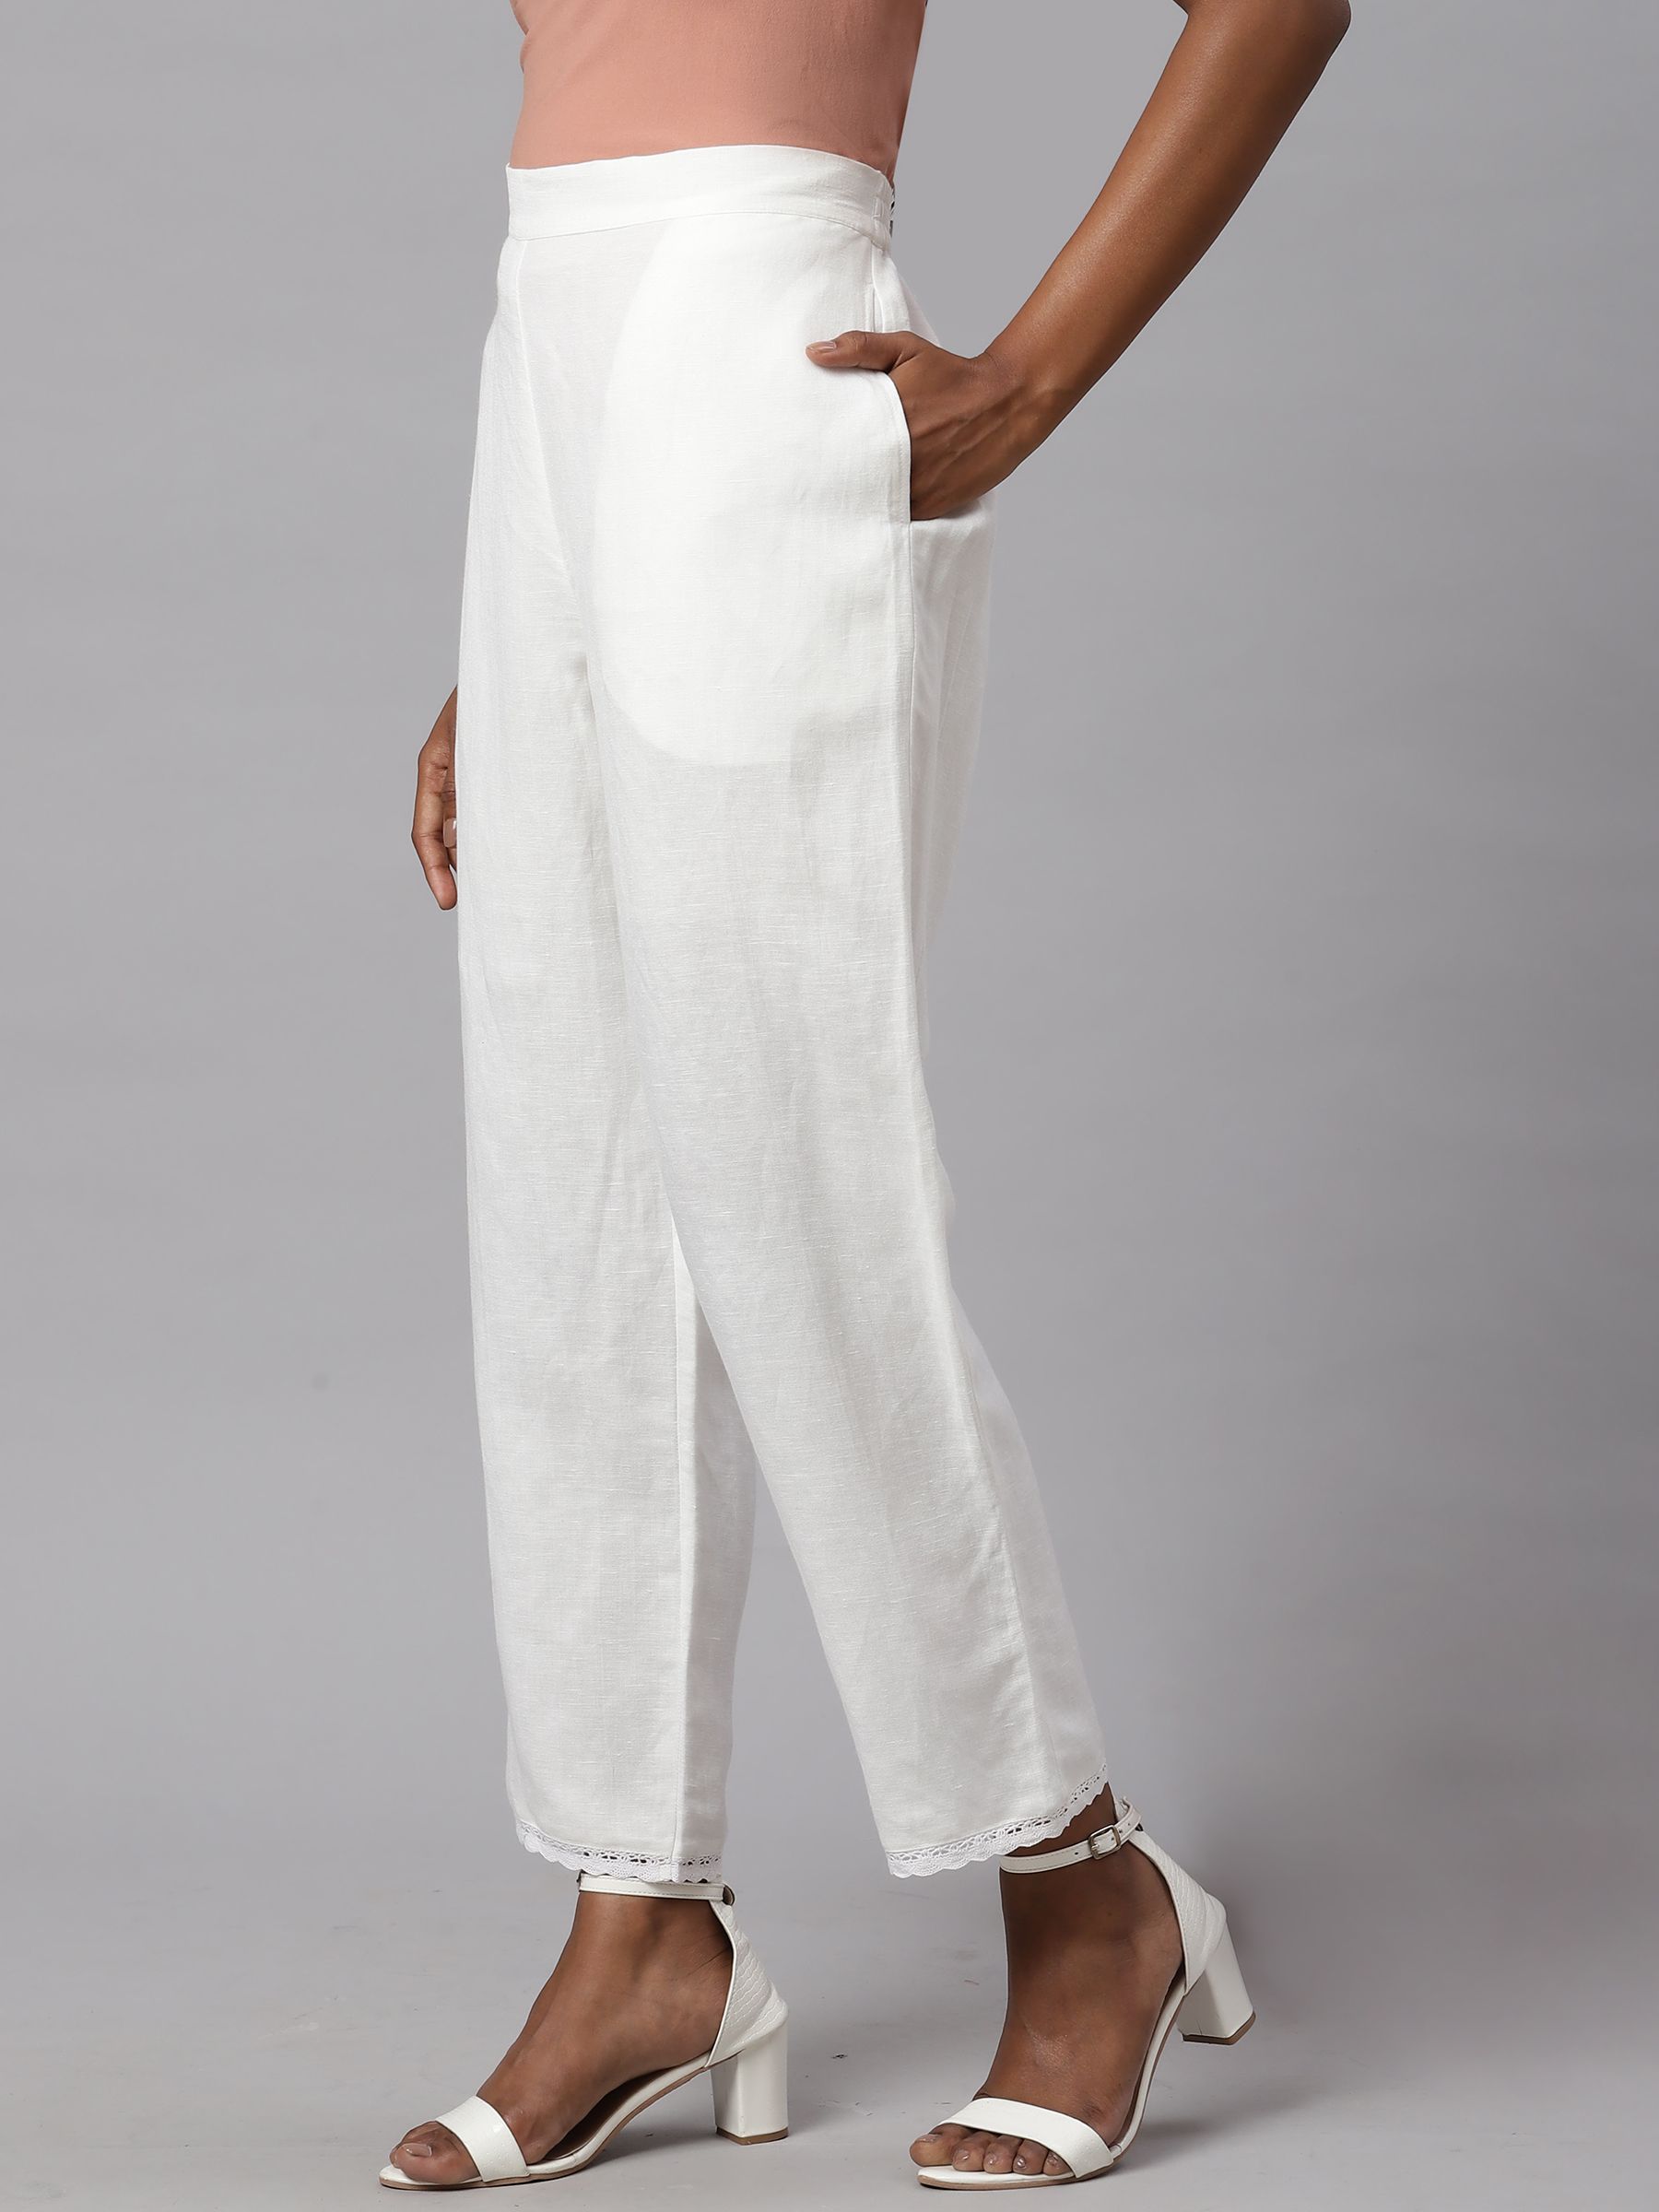 White Linen Trousers » Goshopia: Home of Slow and Sustainable Fashion